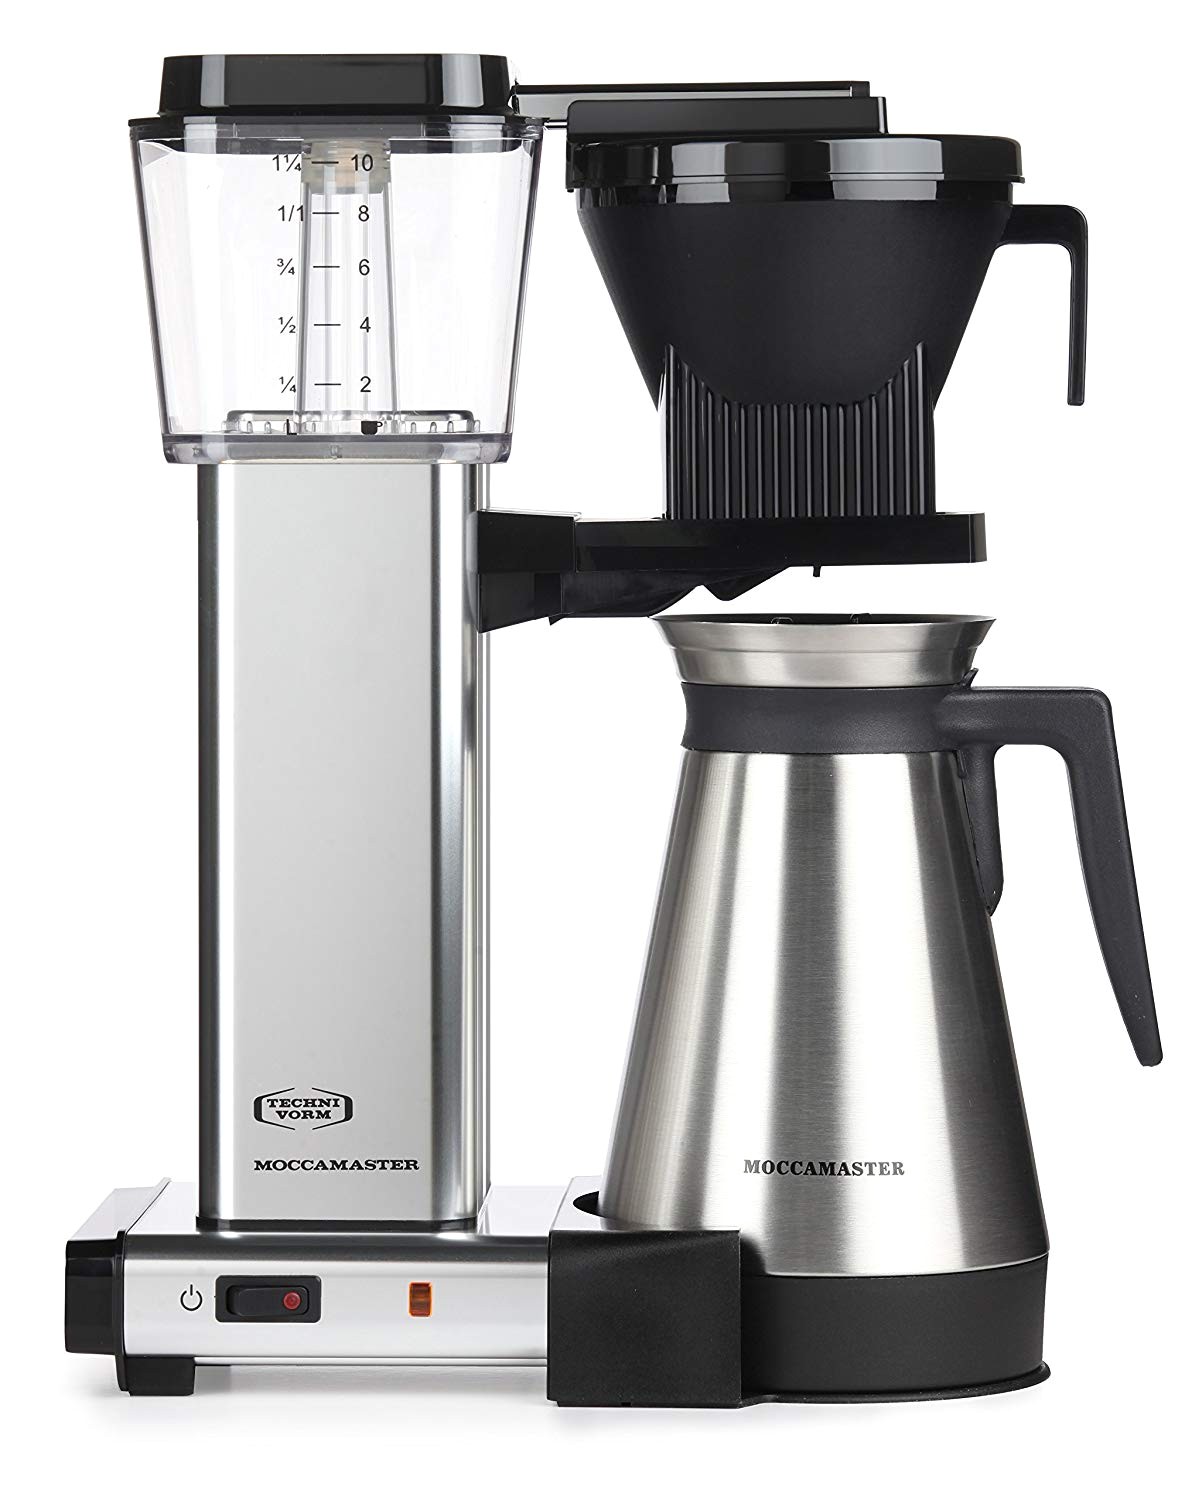 Scaa Approved Coffee Makers Scaa Certified Coffee Makers Best Tasting Coffee Makers